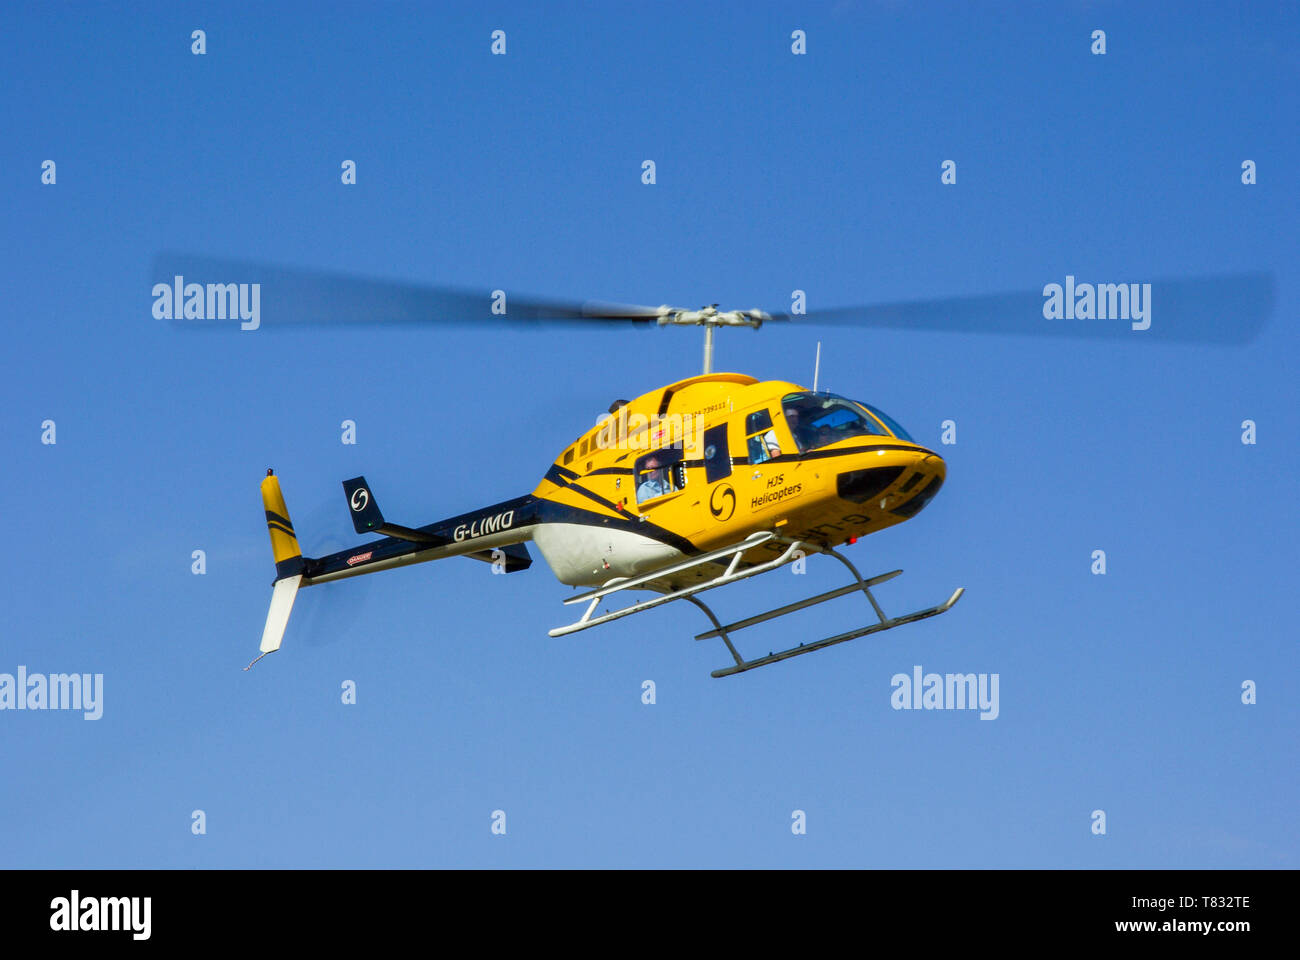 Bell 206 LongRanger G-LIMO helicopter of HJS Helicopters (Heliplayer Ltd) flying. Civilian transport helicopter used for charter and business travel Stock Photo